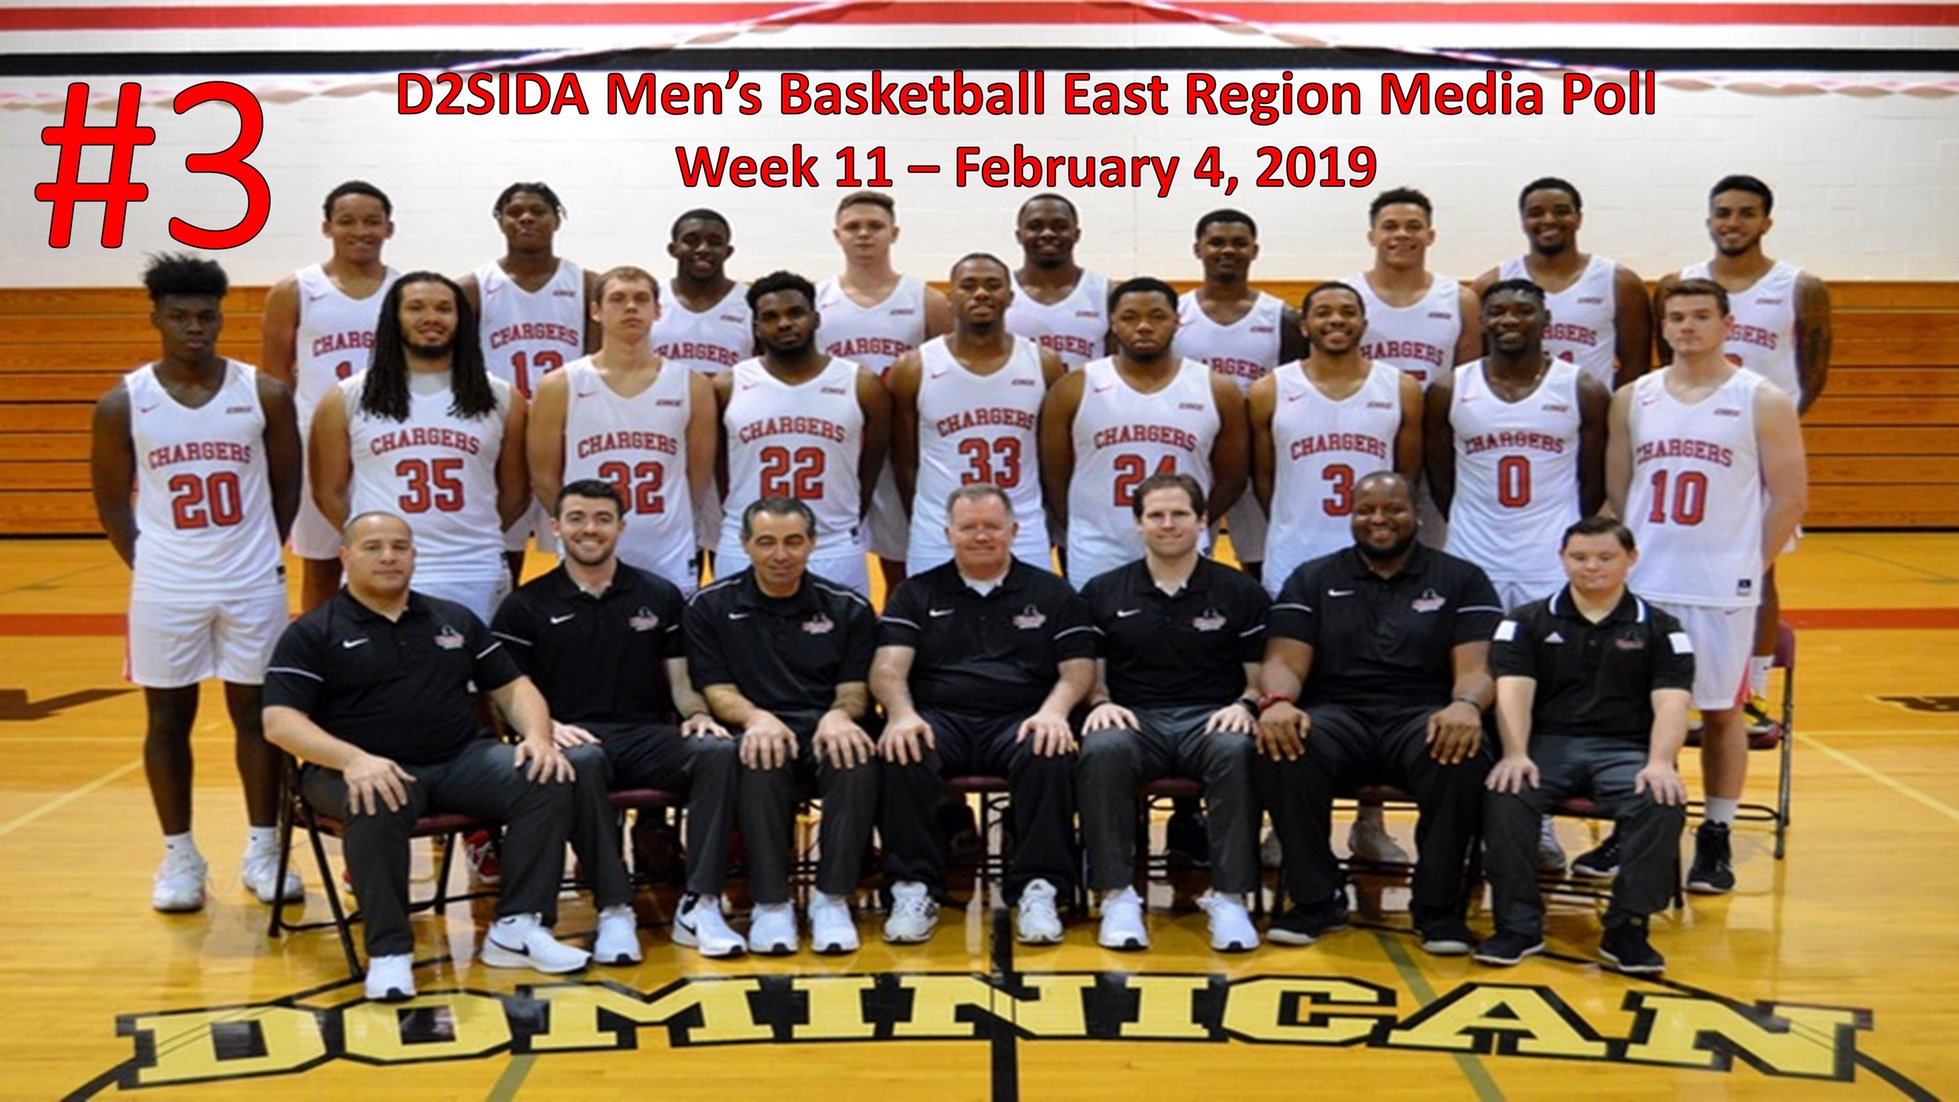 CHARGERS MOVE UP INTO THIRD PLACE IN LATEST D2SIDA EAST REGION MEDIA POLL